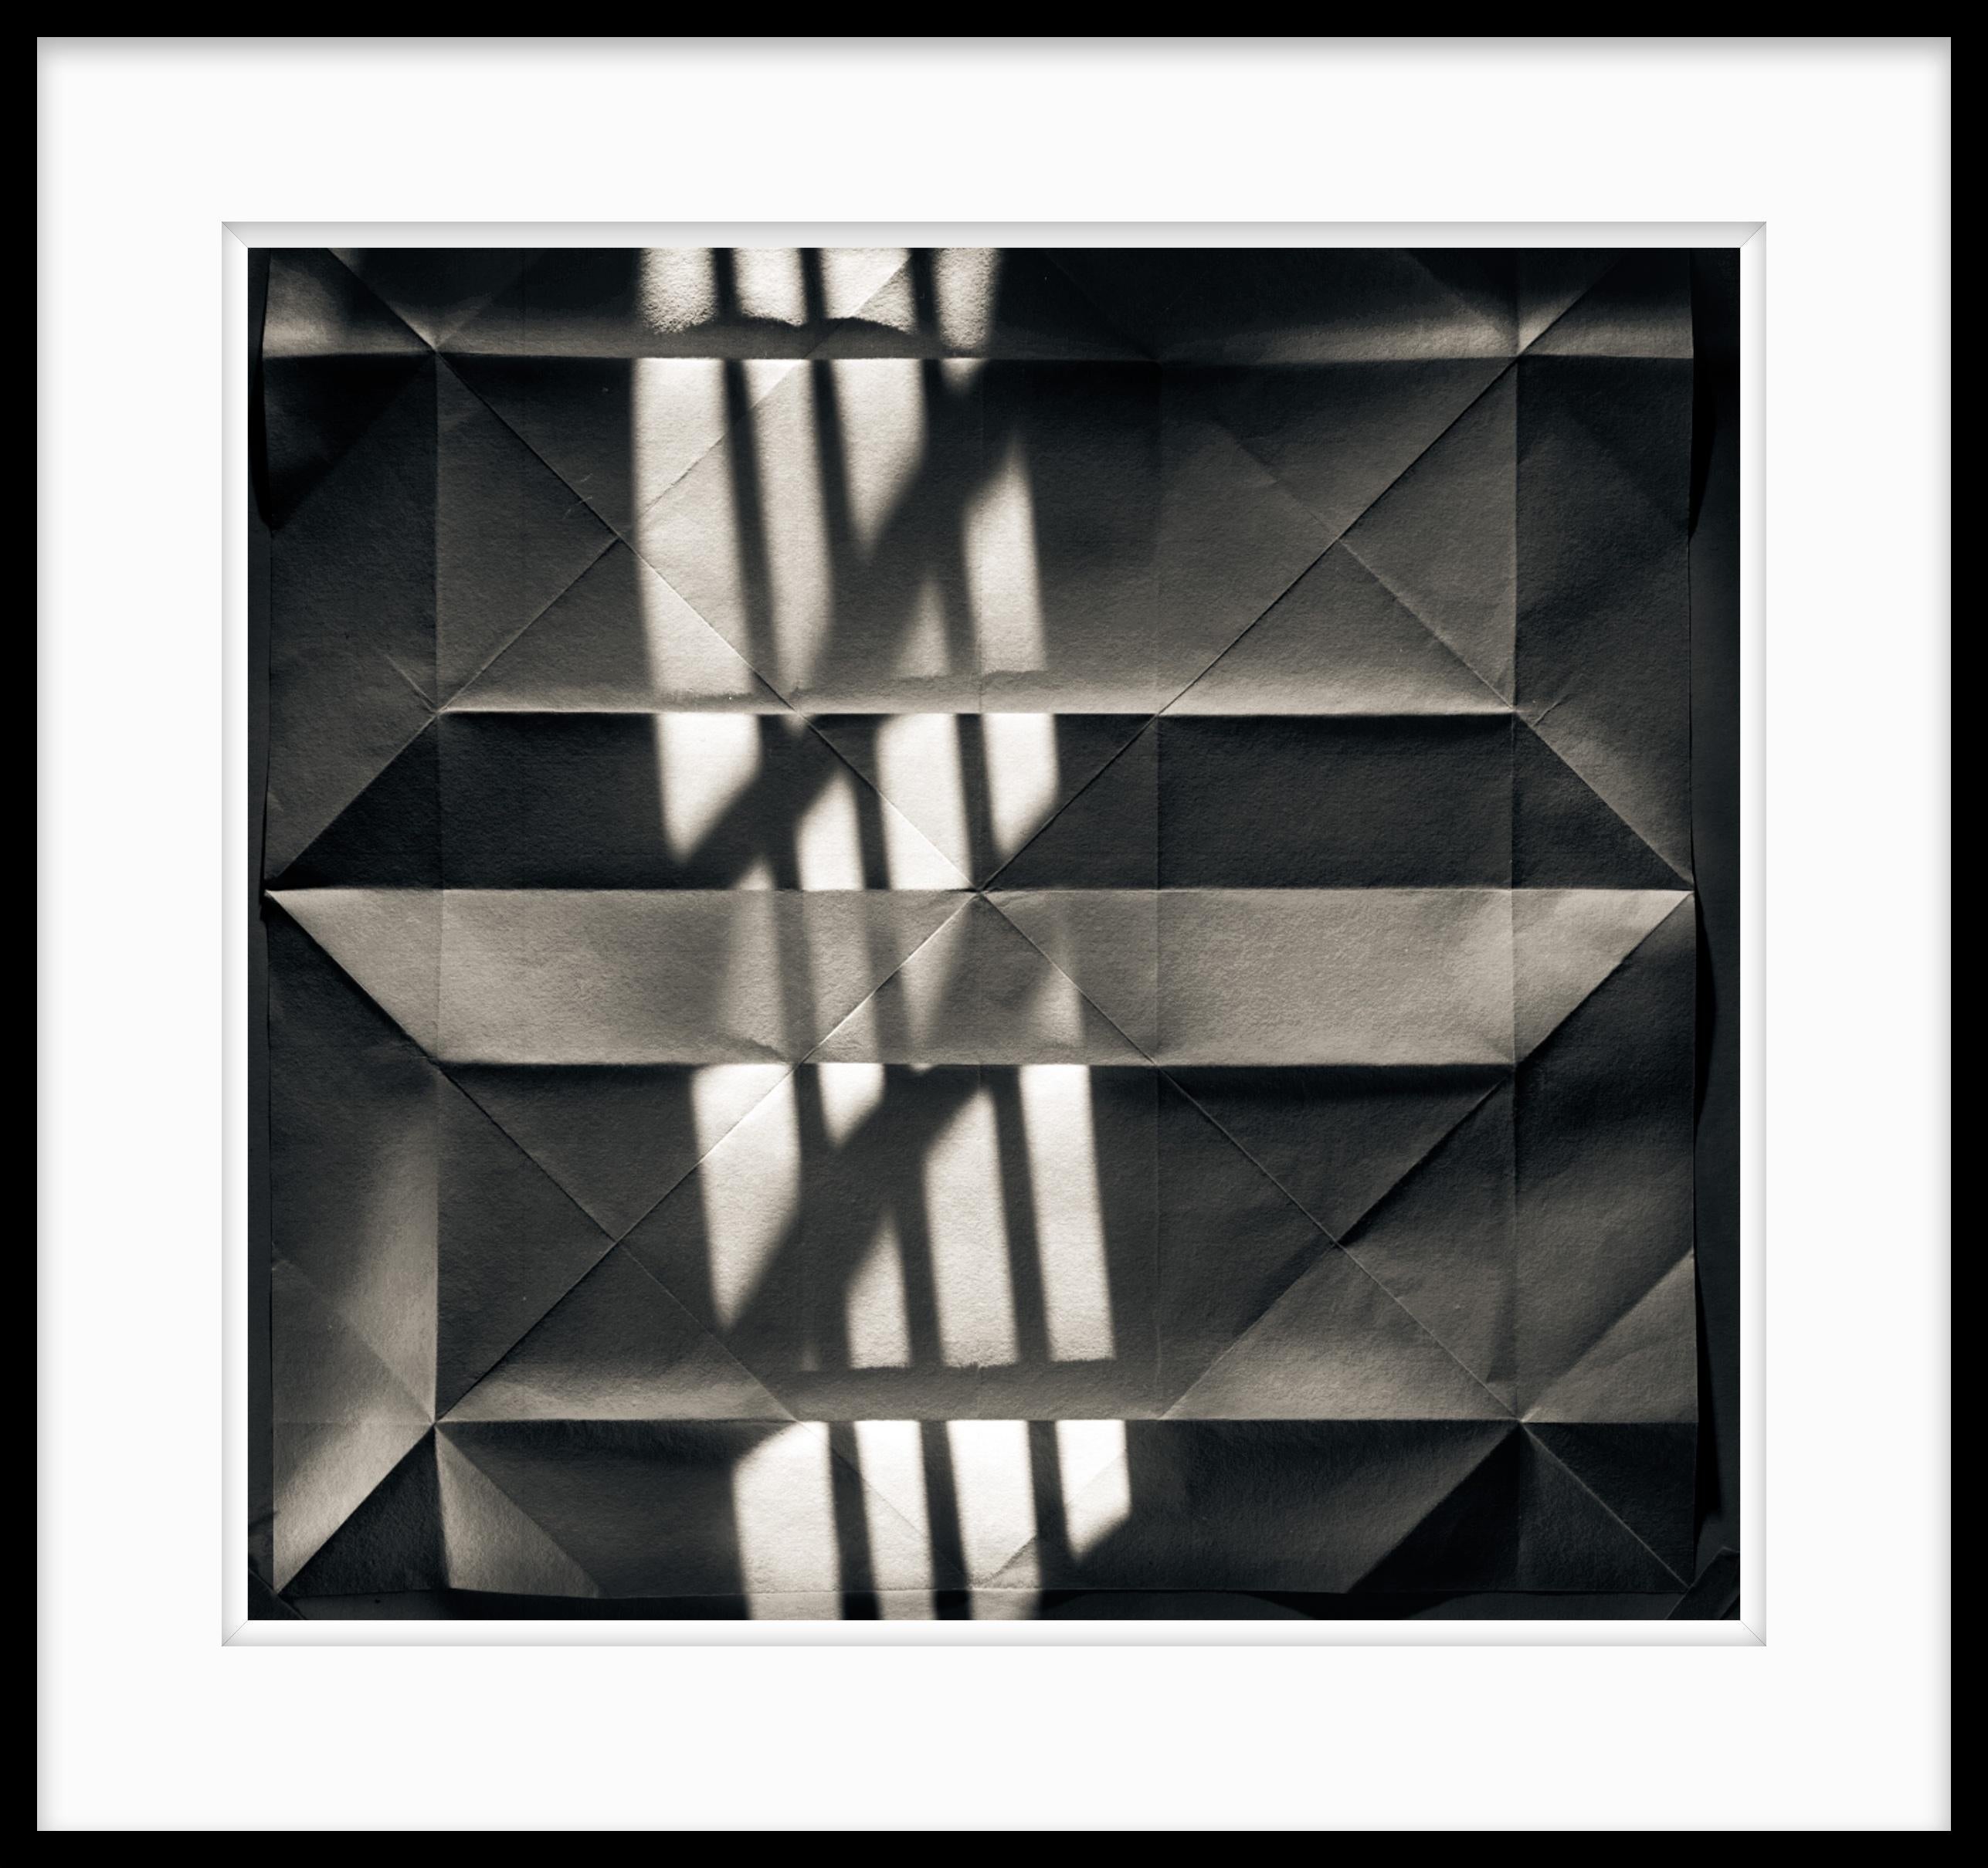 Limited Edition Black and White Abstract Photograph  - Origami Folds #38

#38 from the Origami Folds series has been in several museum exhibitions and corporate collections.

Astrophysicist Koryo Miura created the unfolding solar panels for a